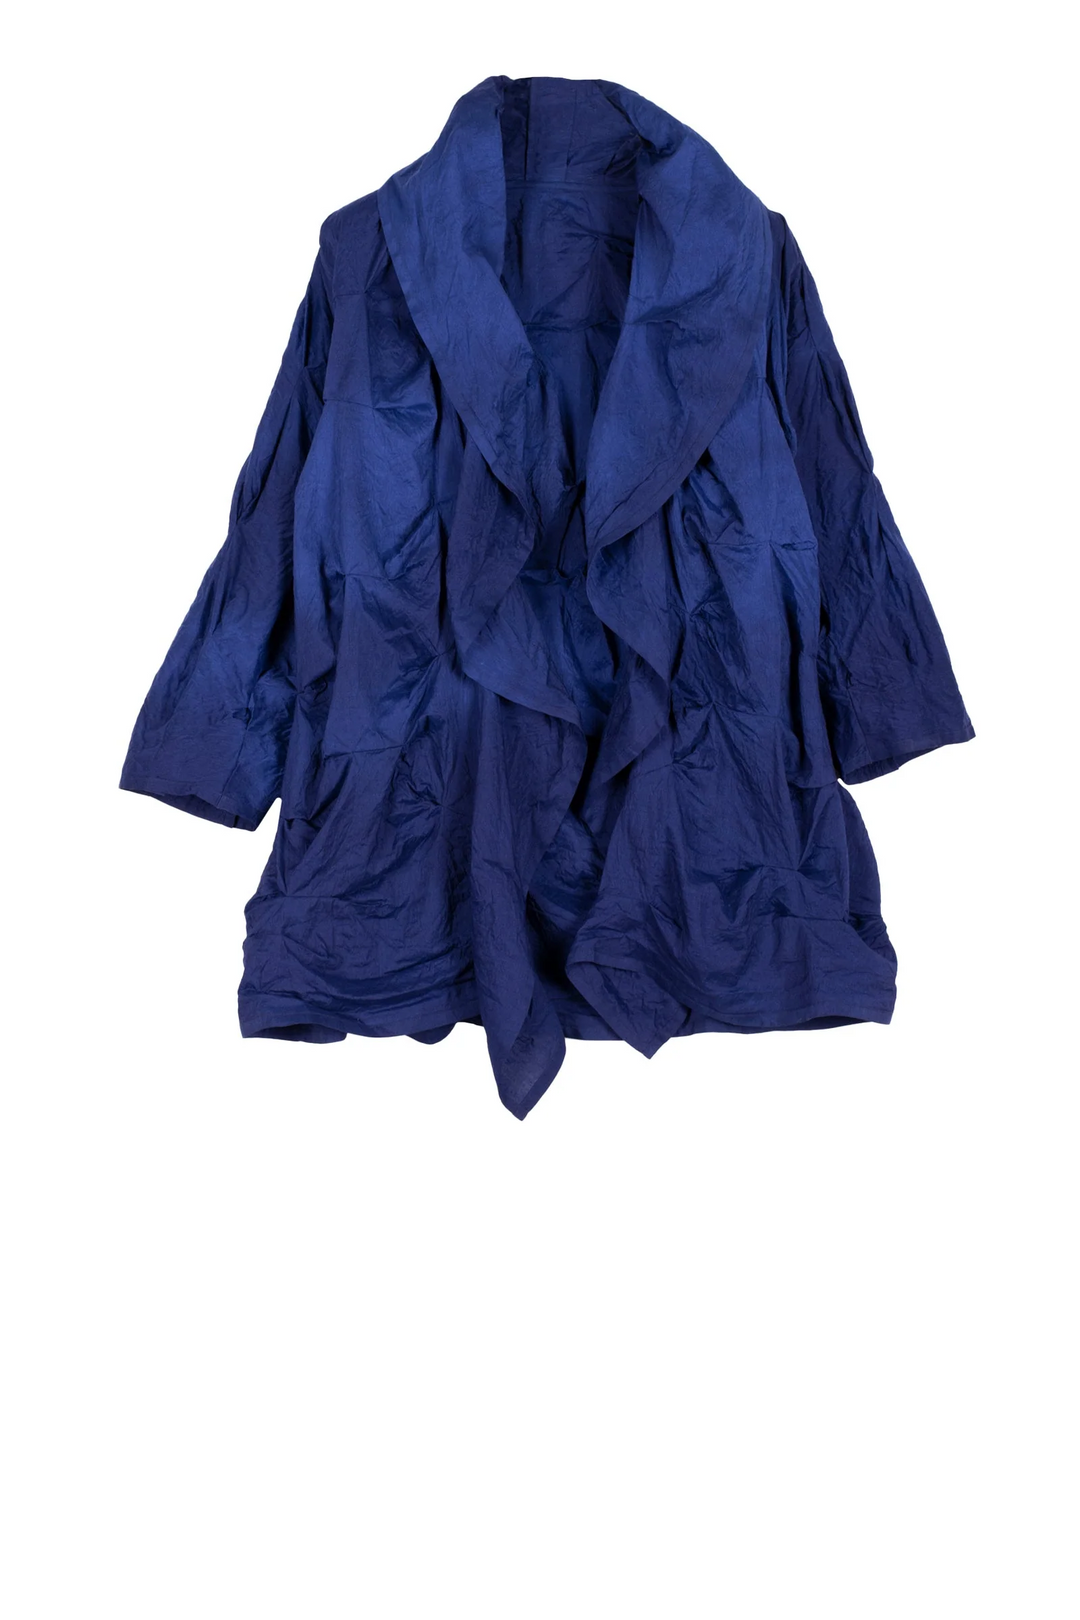 DYED COTTON SILK HEAVY VOILE WAVY TUCK COCOON JACKET - dh1063-blu -